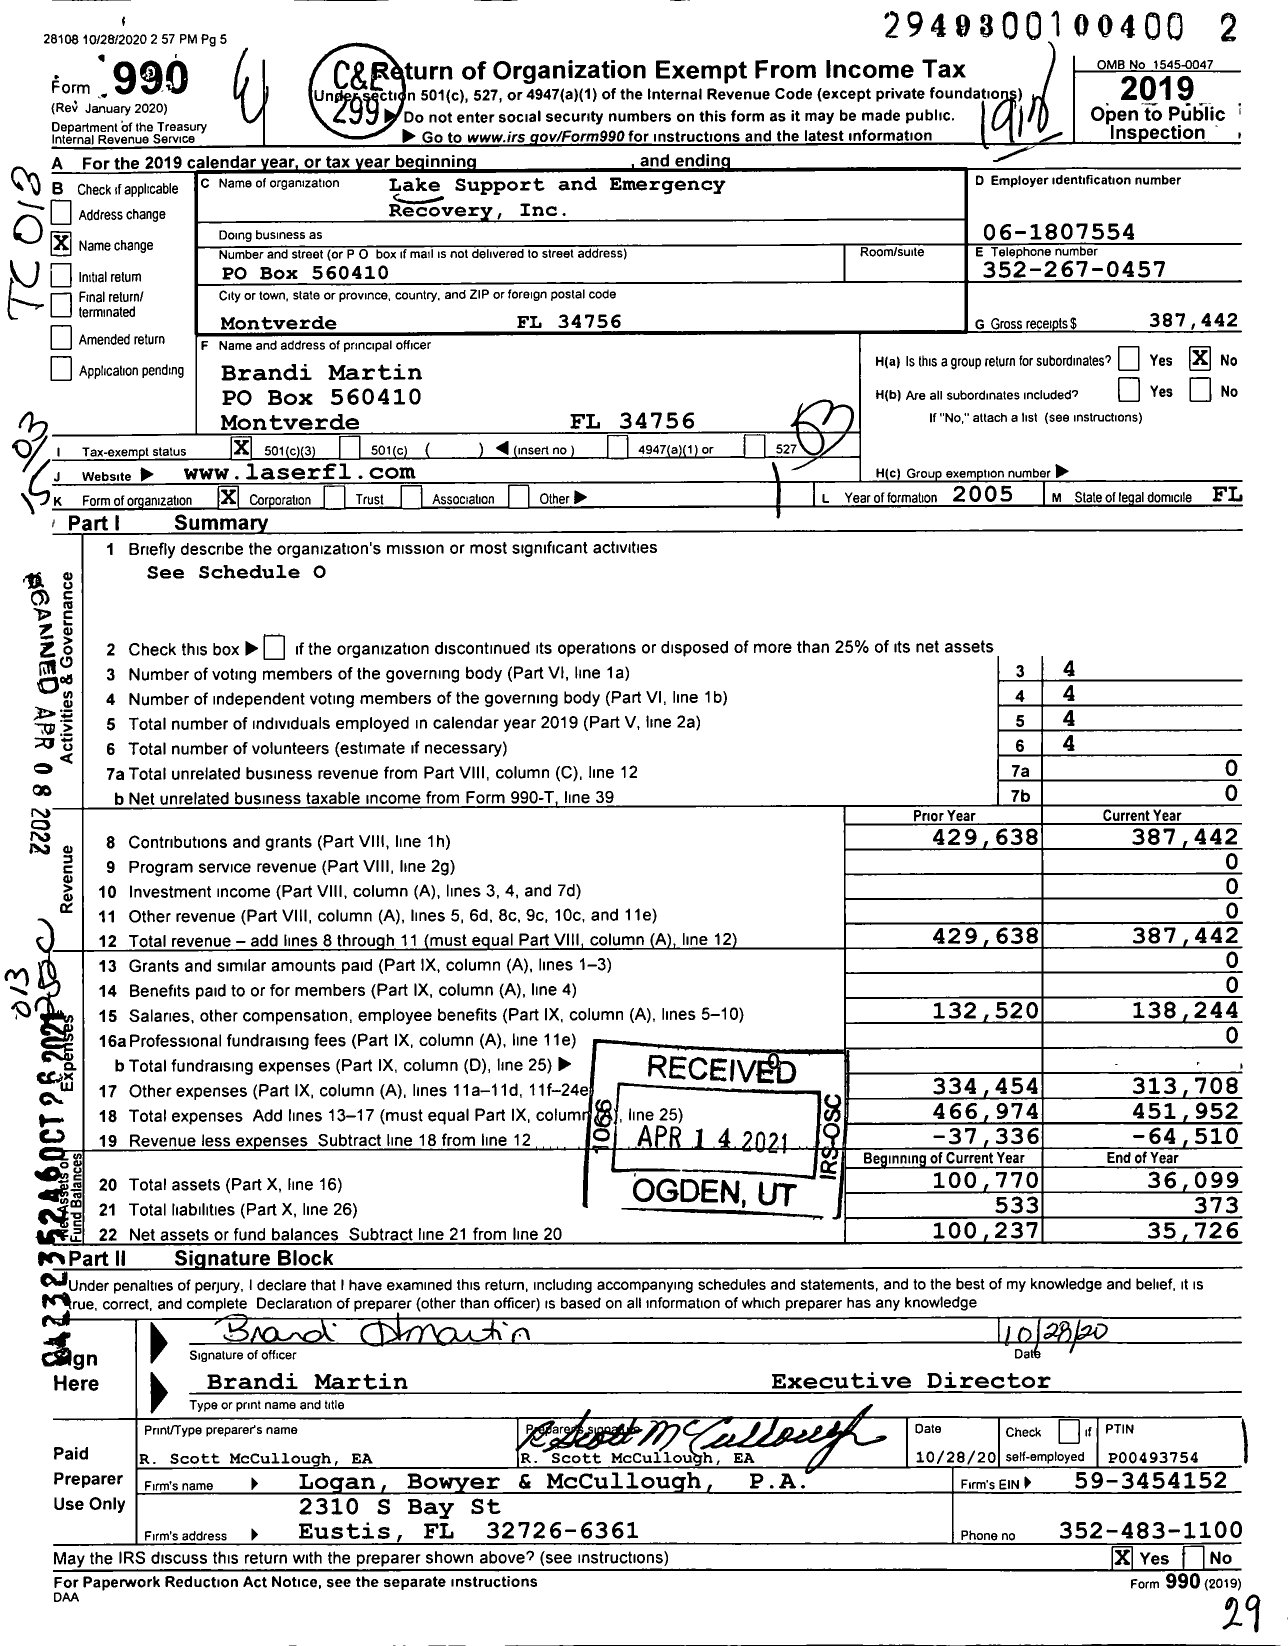 Image of first page of 2019 Form 990 for Lake Support and Emergency Recovery